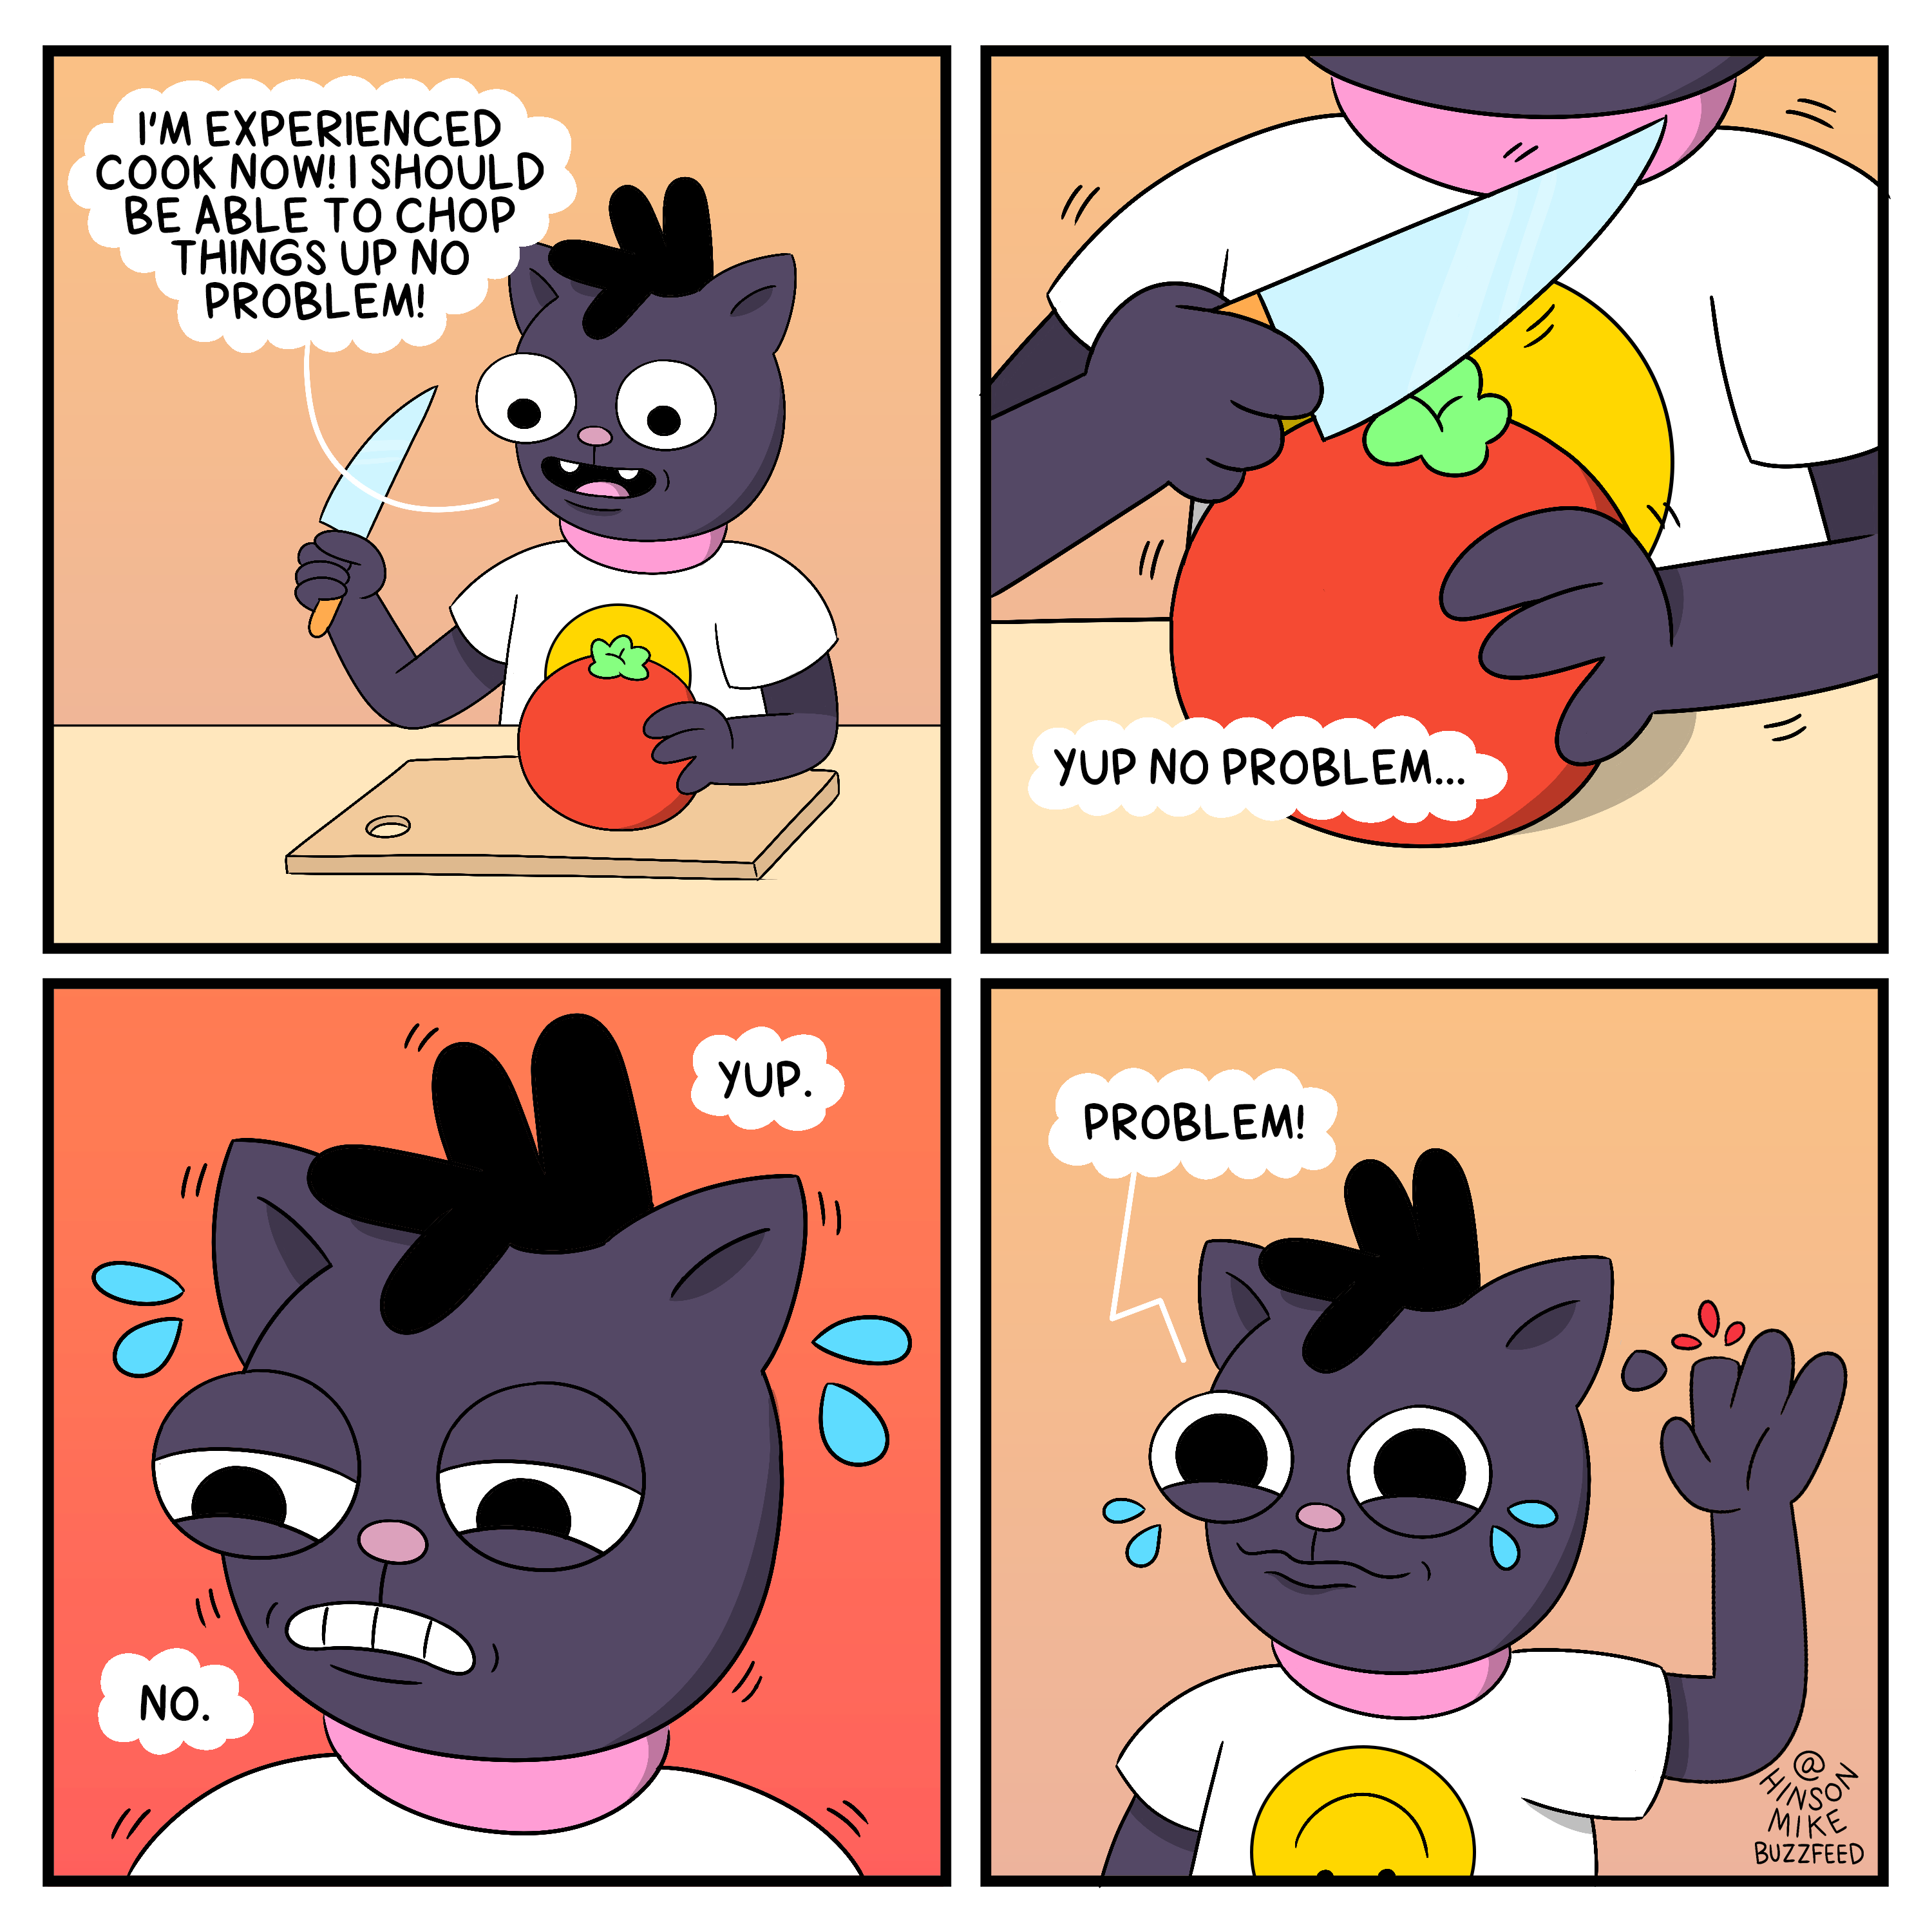 A cartoon of a cat trying to cut a tomato with a knife, but cuts finger instead while crying